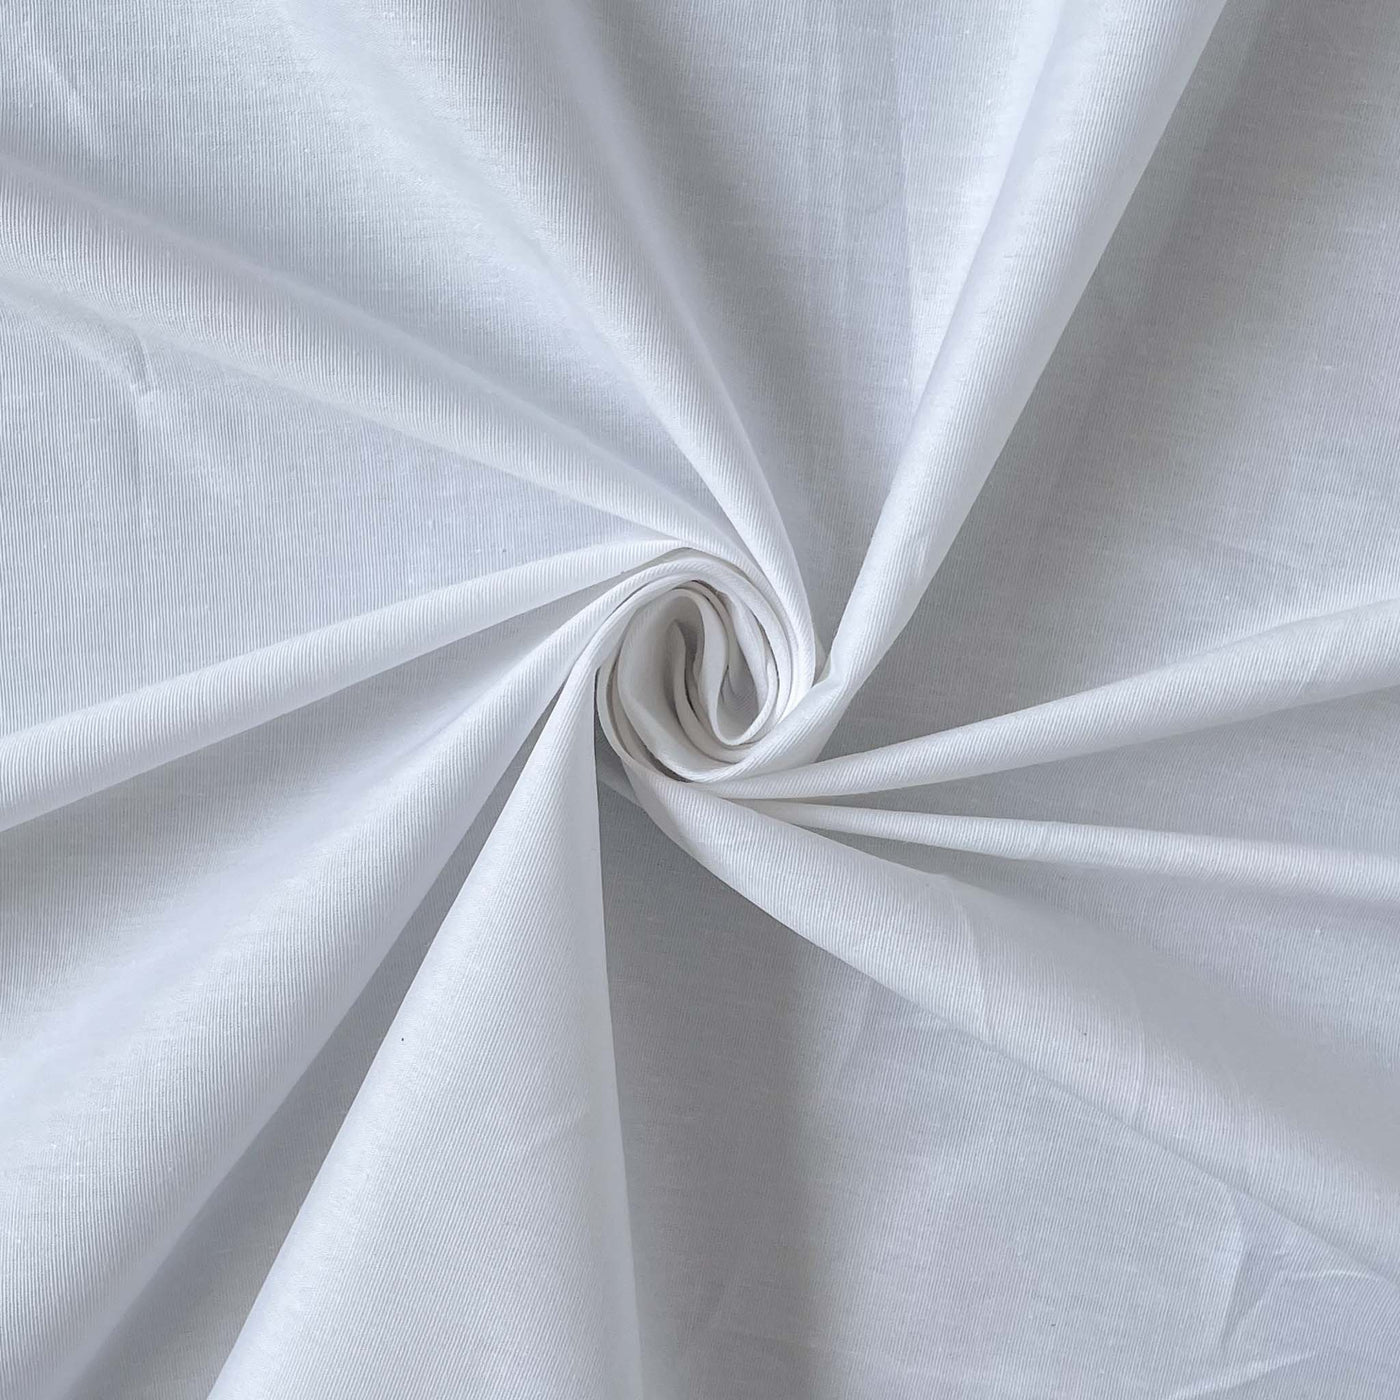 PLAIN WHITE PURE COTTON 190 GSM FABRIC - BLEACHED, DYEABLE & 36 INCH WIDTH